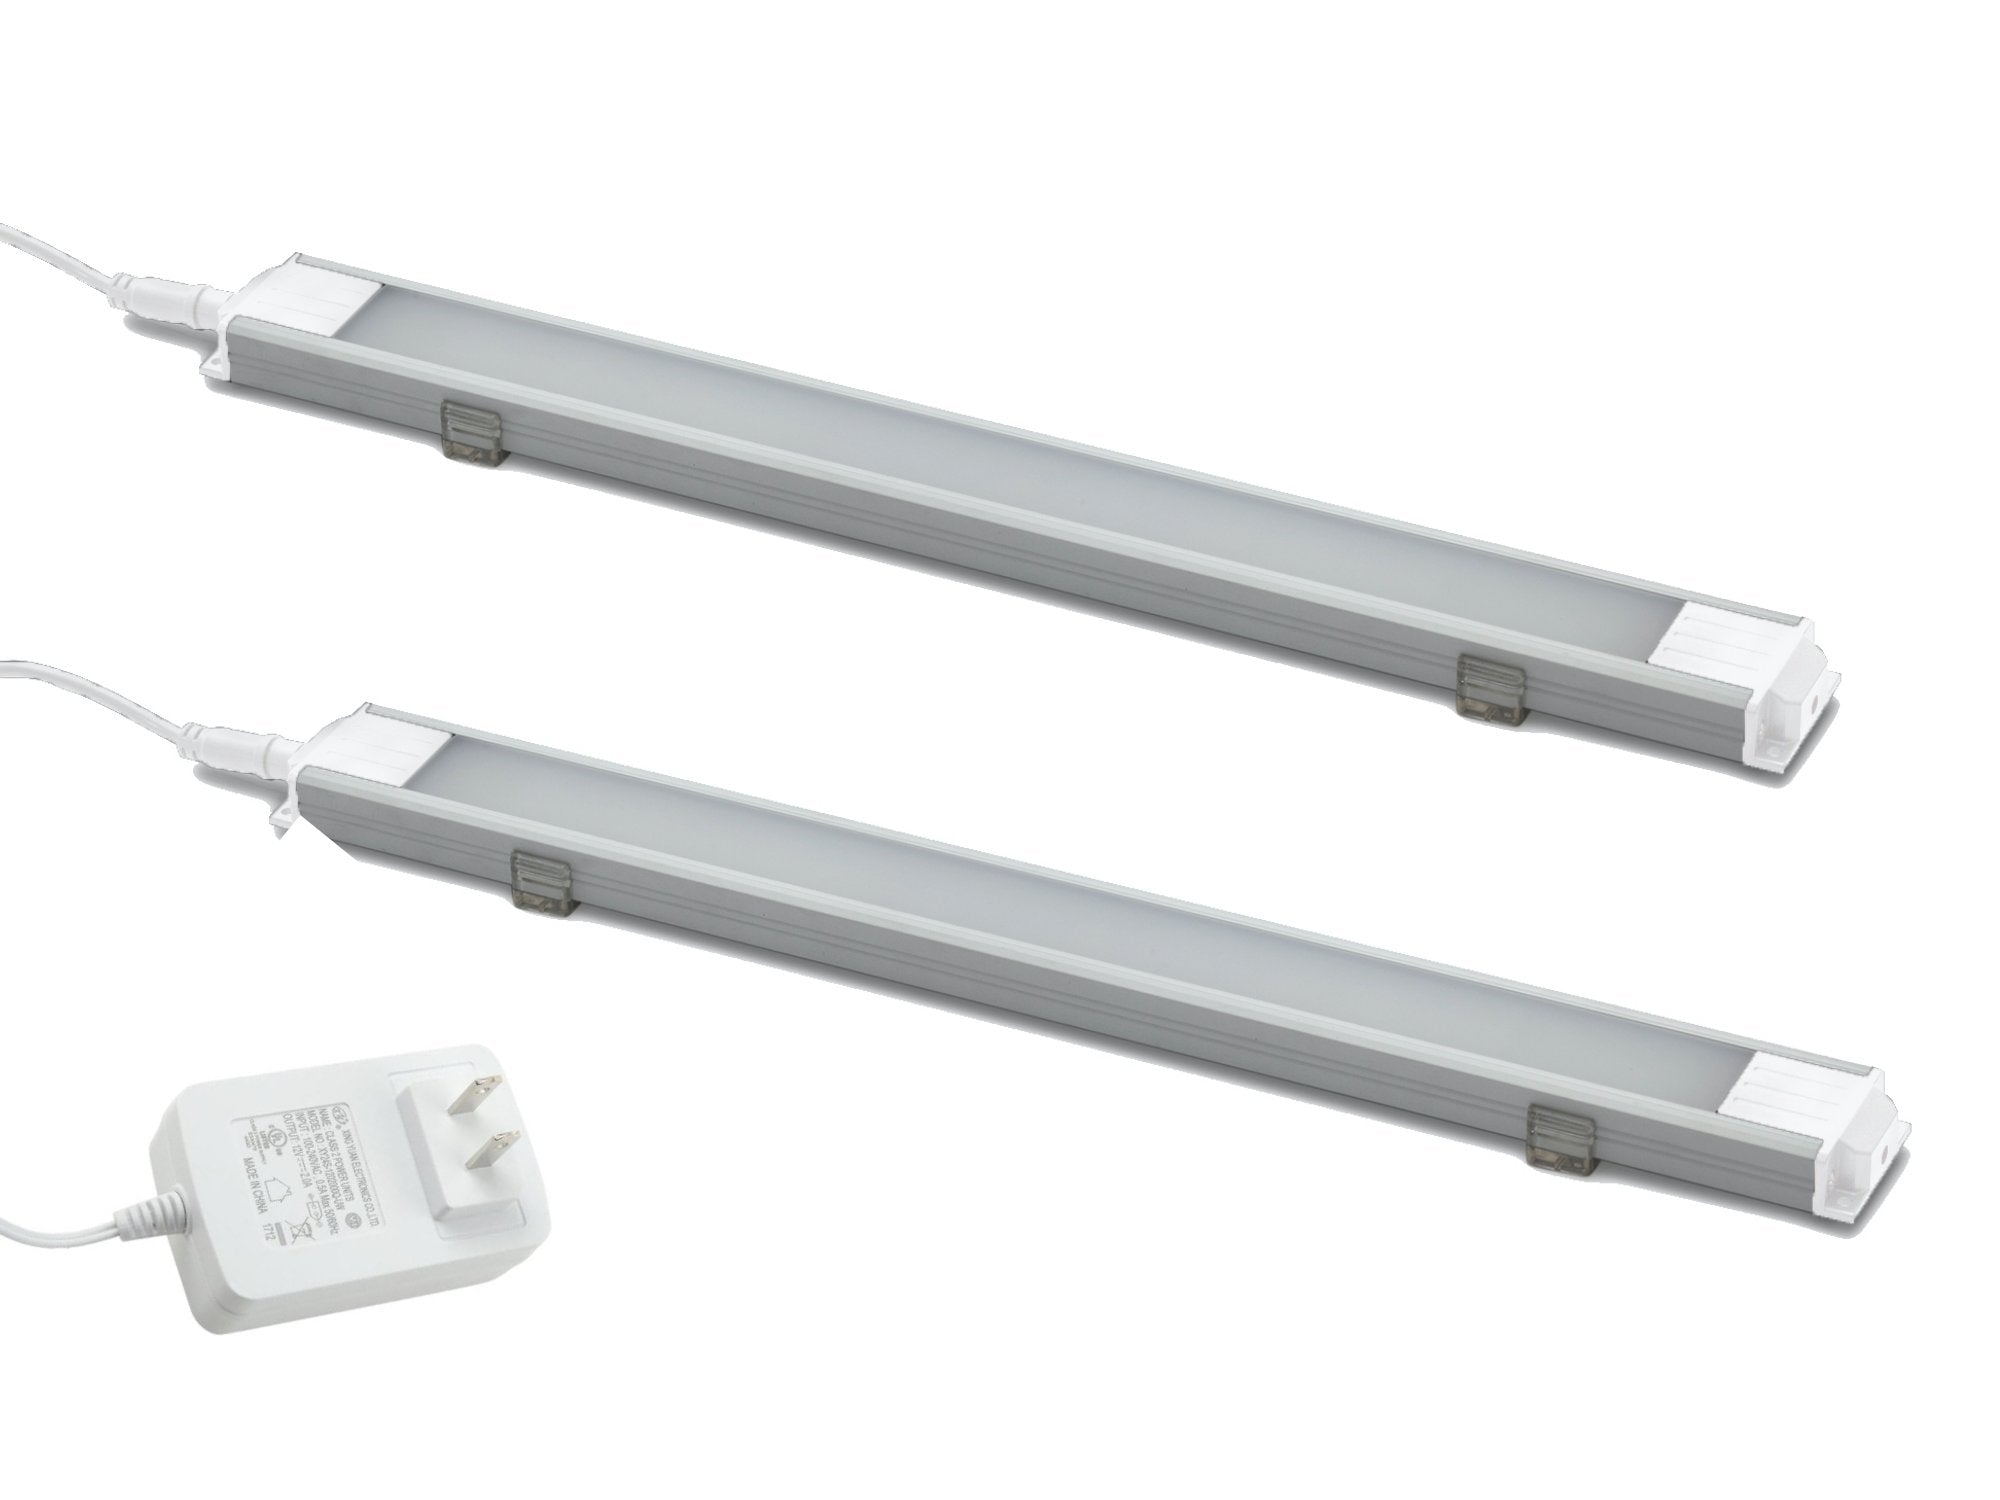 LED Display Lights (1 x Light Adapters, 1 x Light Extensions)